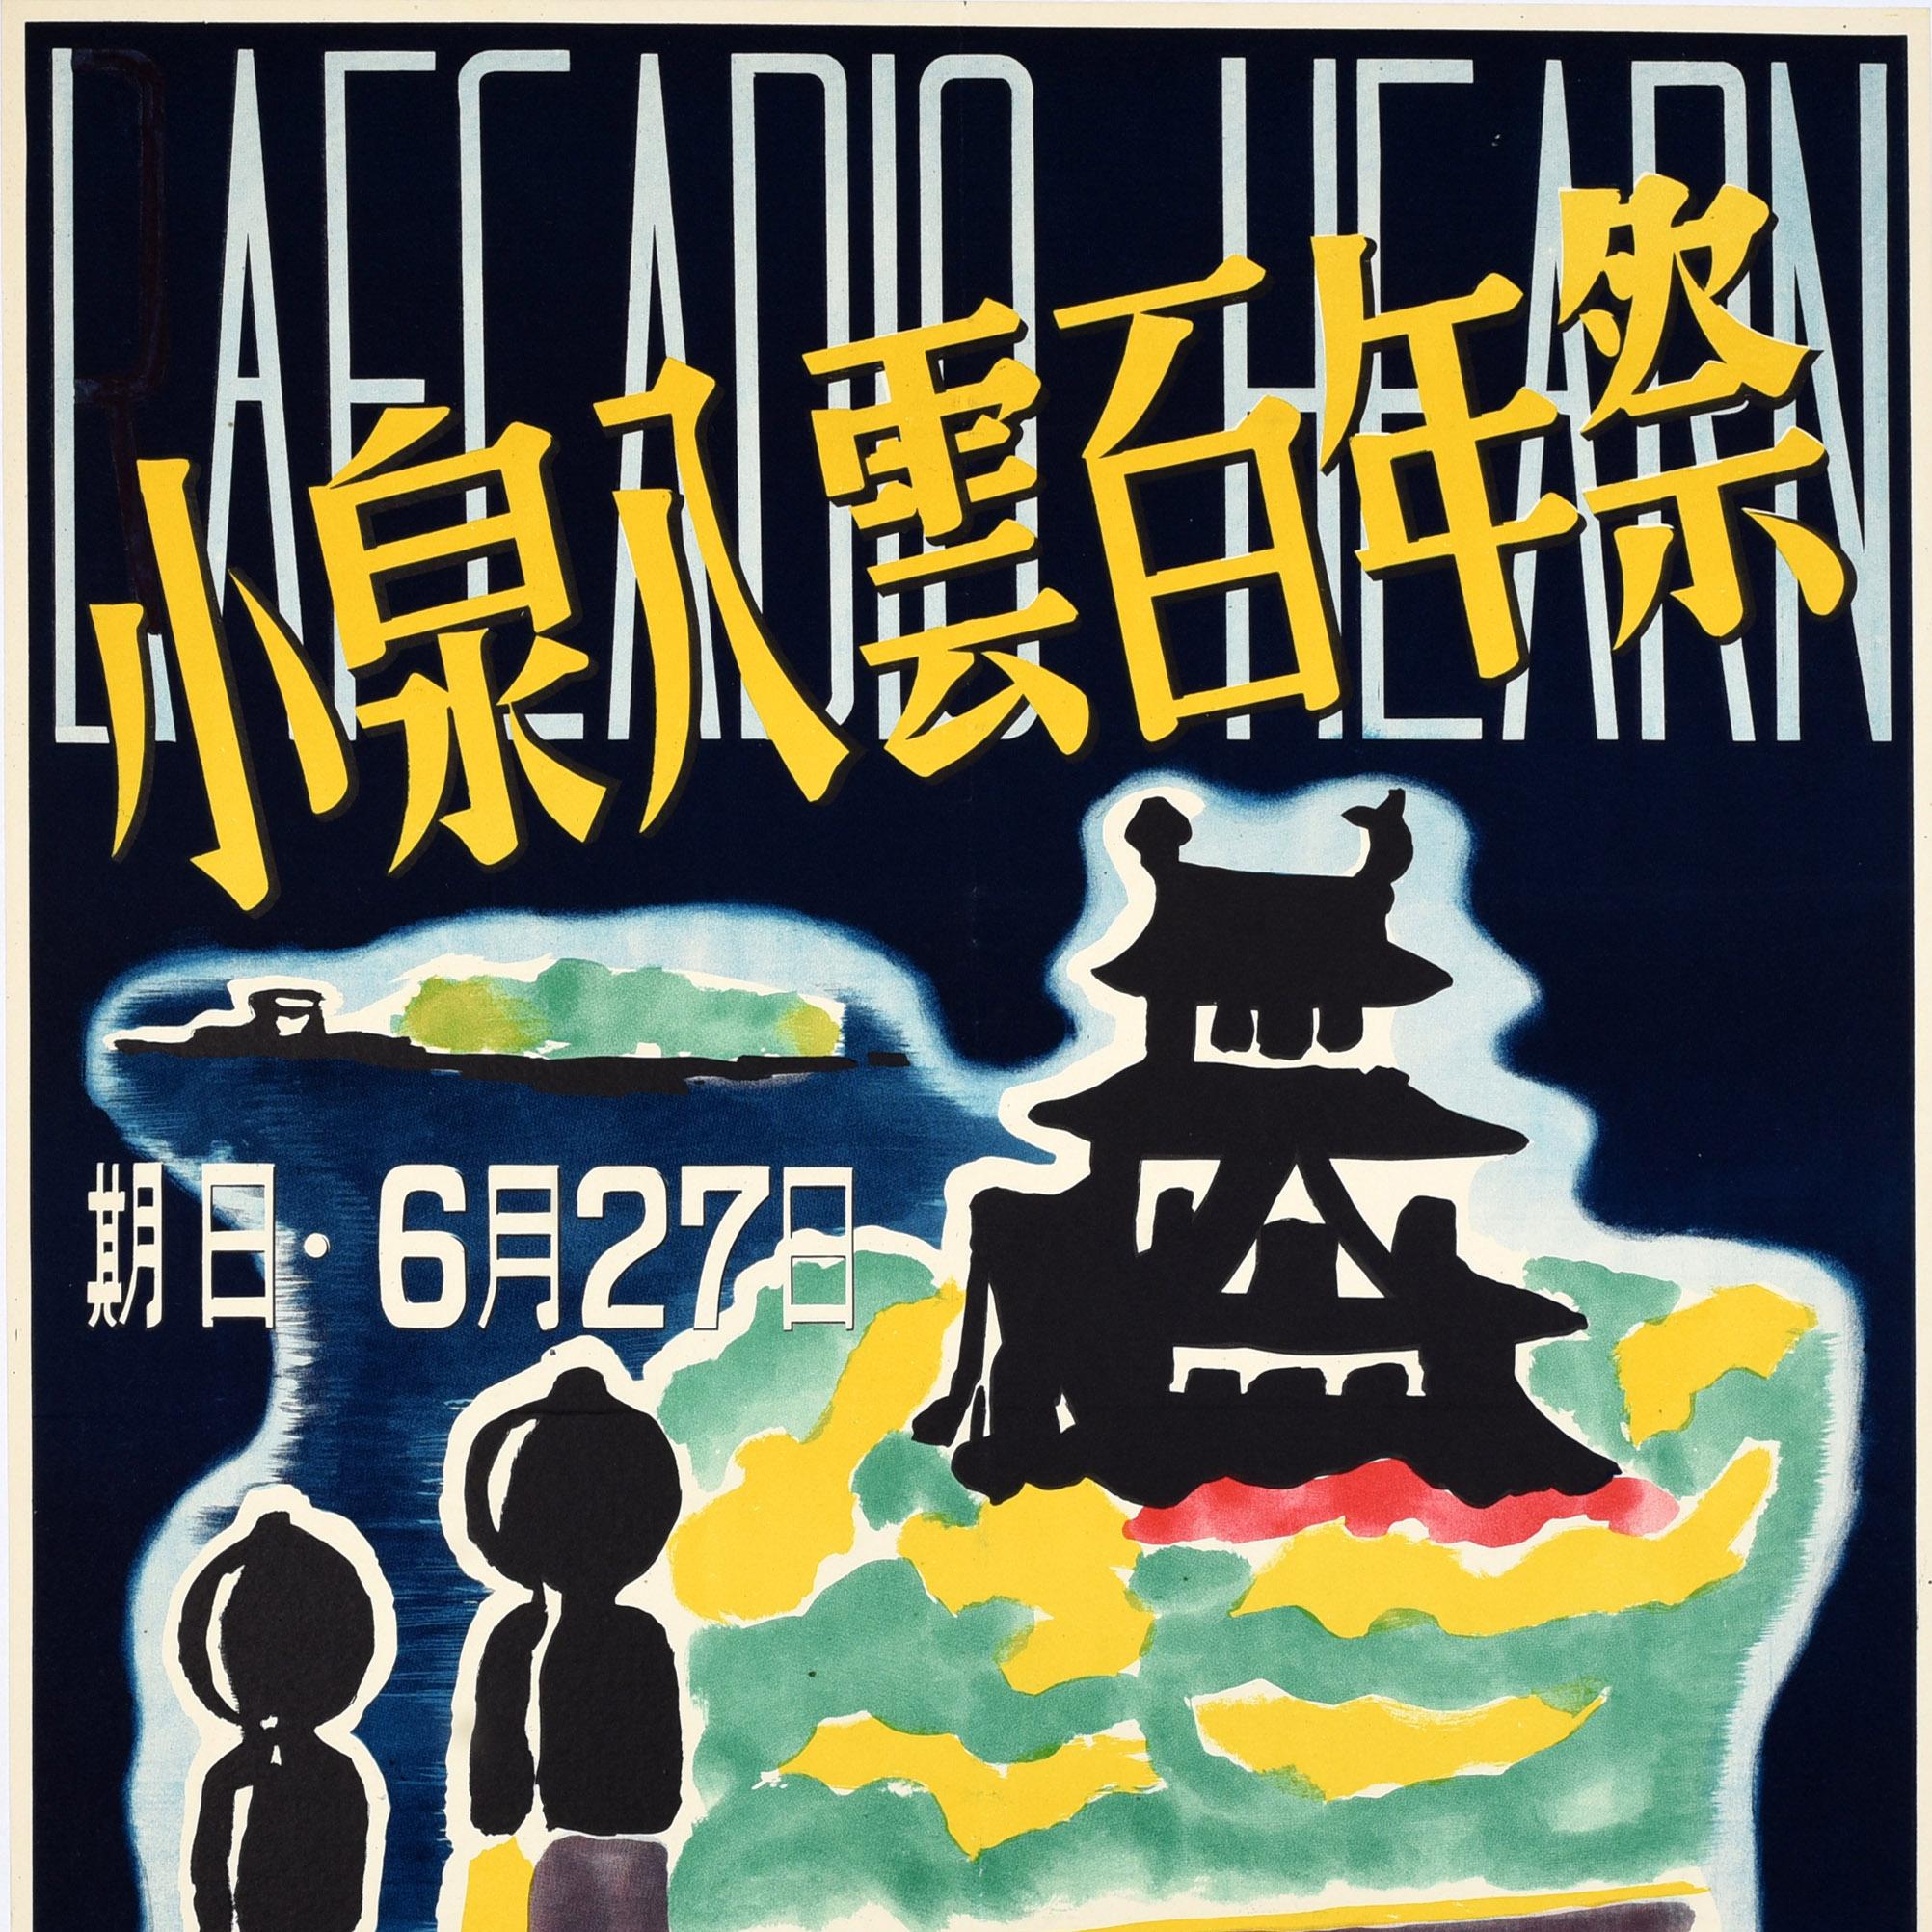 Original vintage poster advertising the Birth Centenary Commemoration of Lafcadio Hearn / Yakumo Koizumi held in Matsue City on 27 June 1950 featuring a colourful painting of the historic Matsue Castle and lake with the text on the dark background